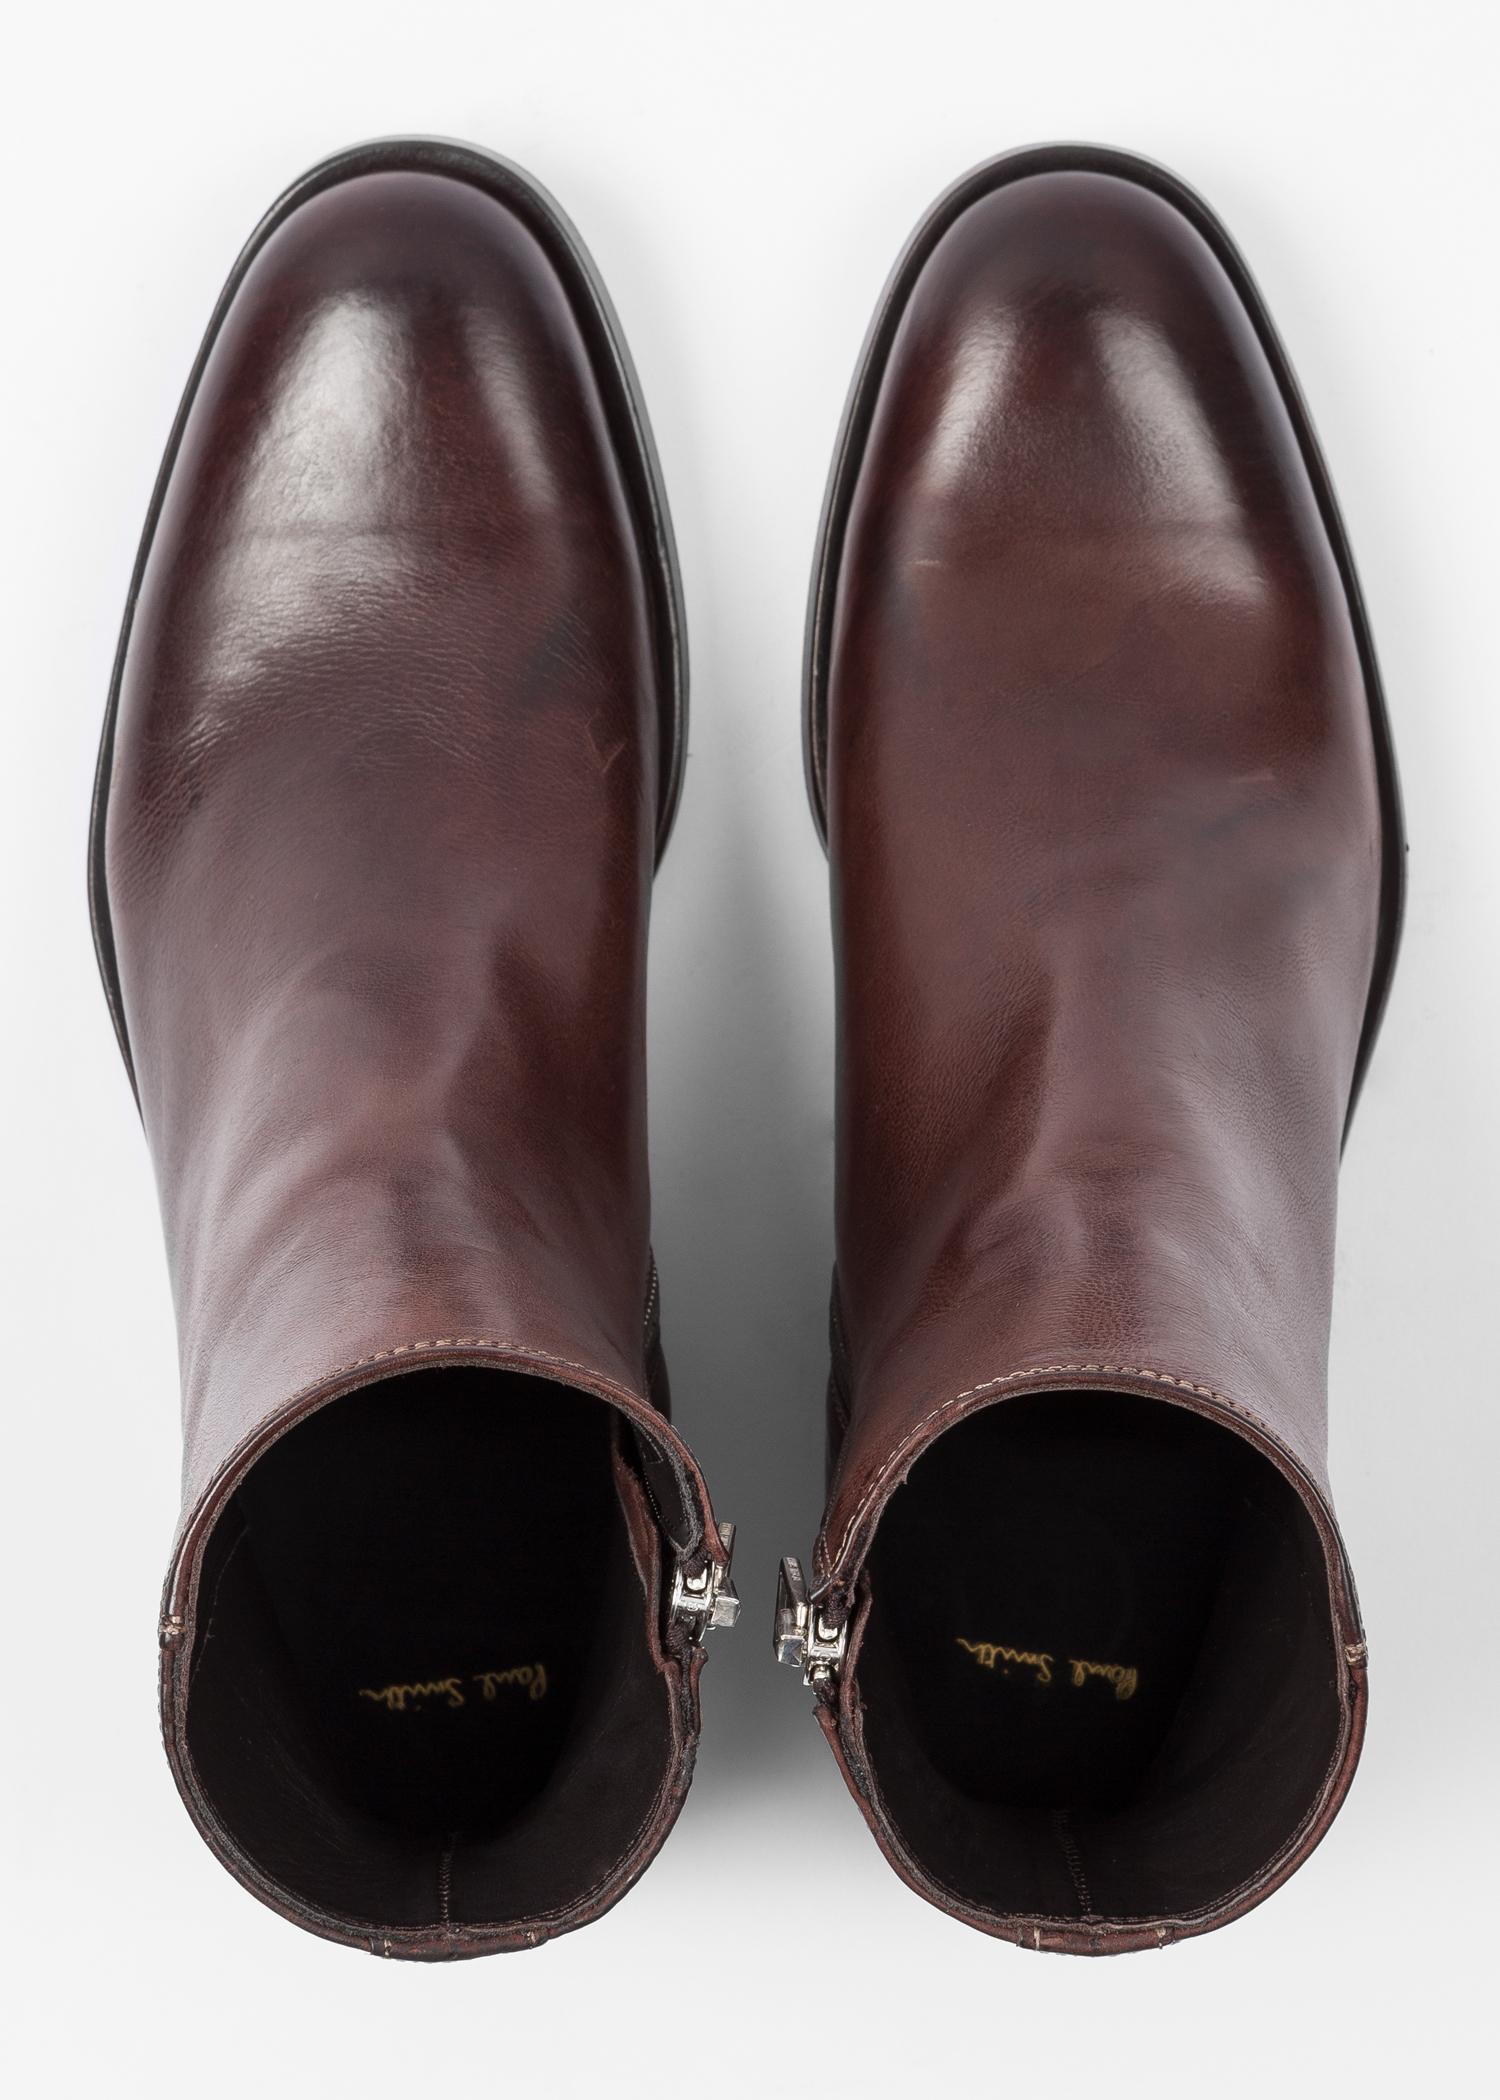 Paul Smith Dark Brown Leather 'adalia' Ankle Boots - Lyst